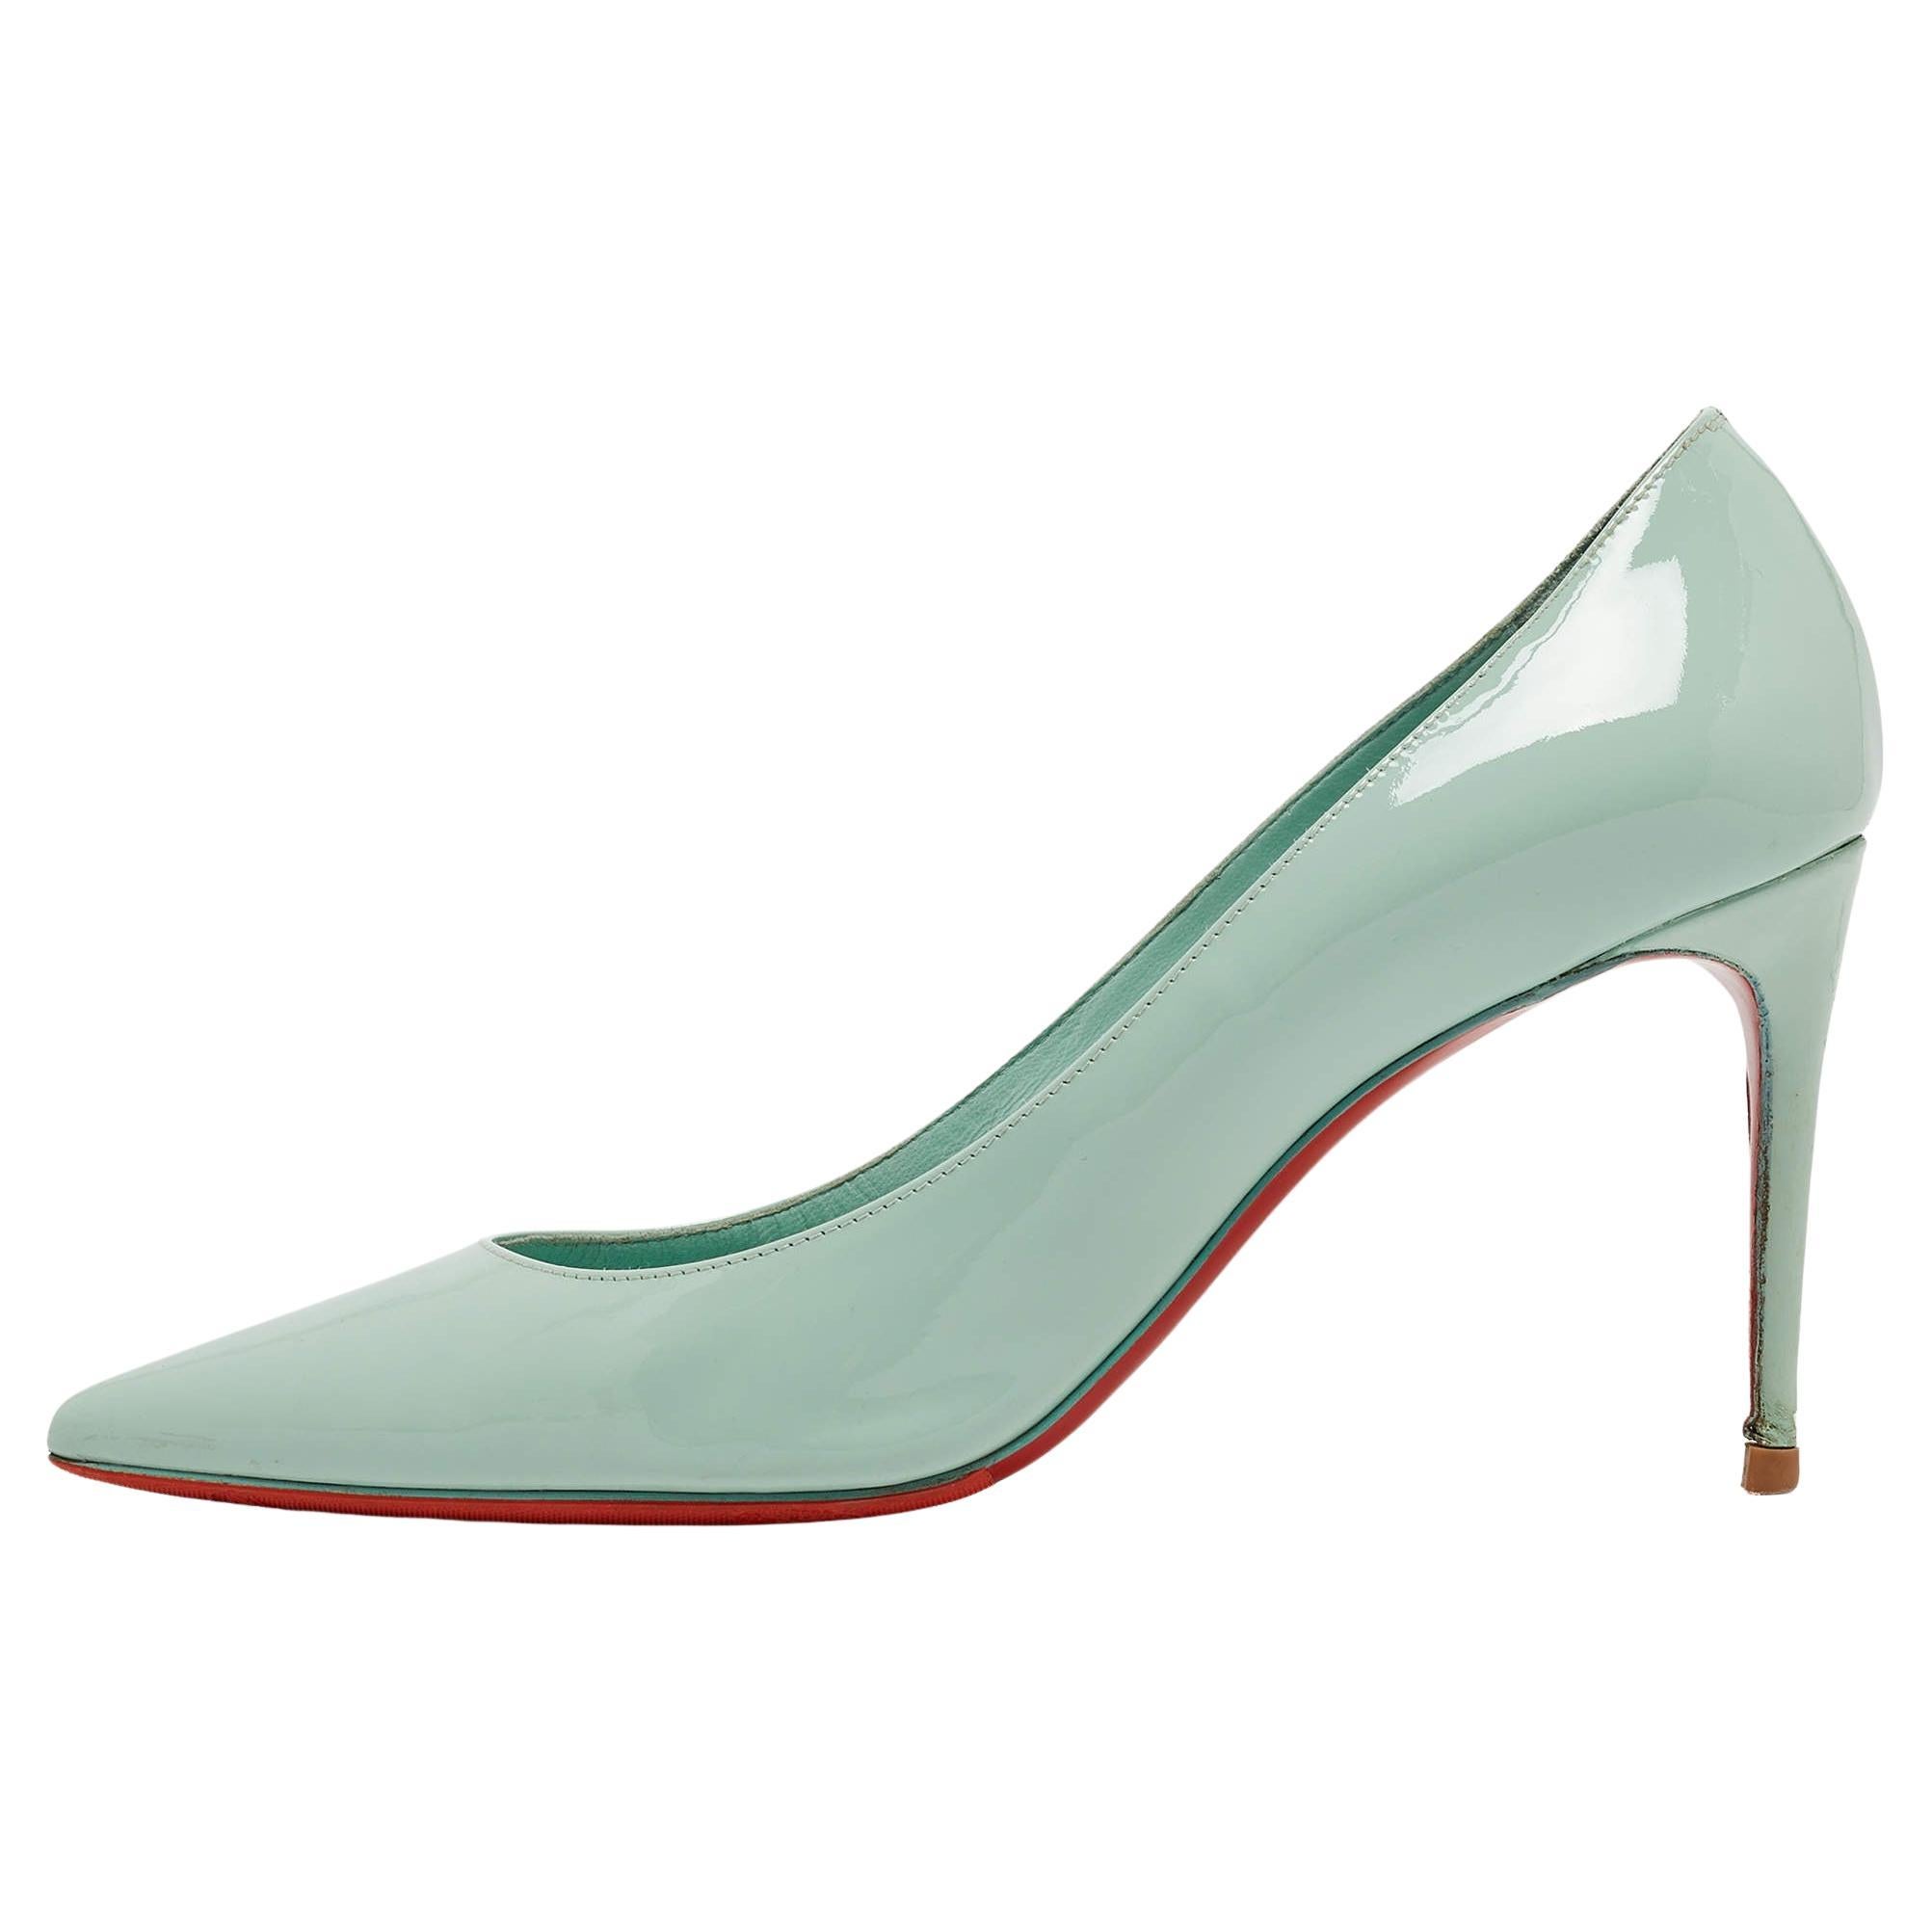 Christian Louboutin Light Green Patent Leather Pigalle Pointed Toe Pumps Size 38